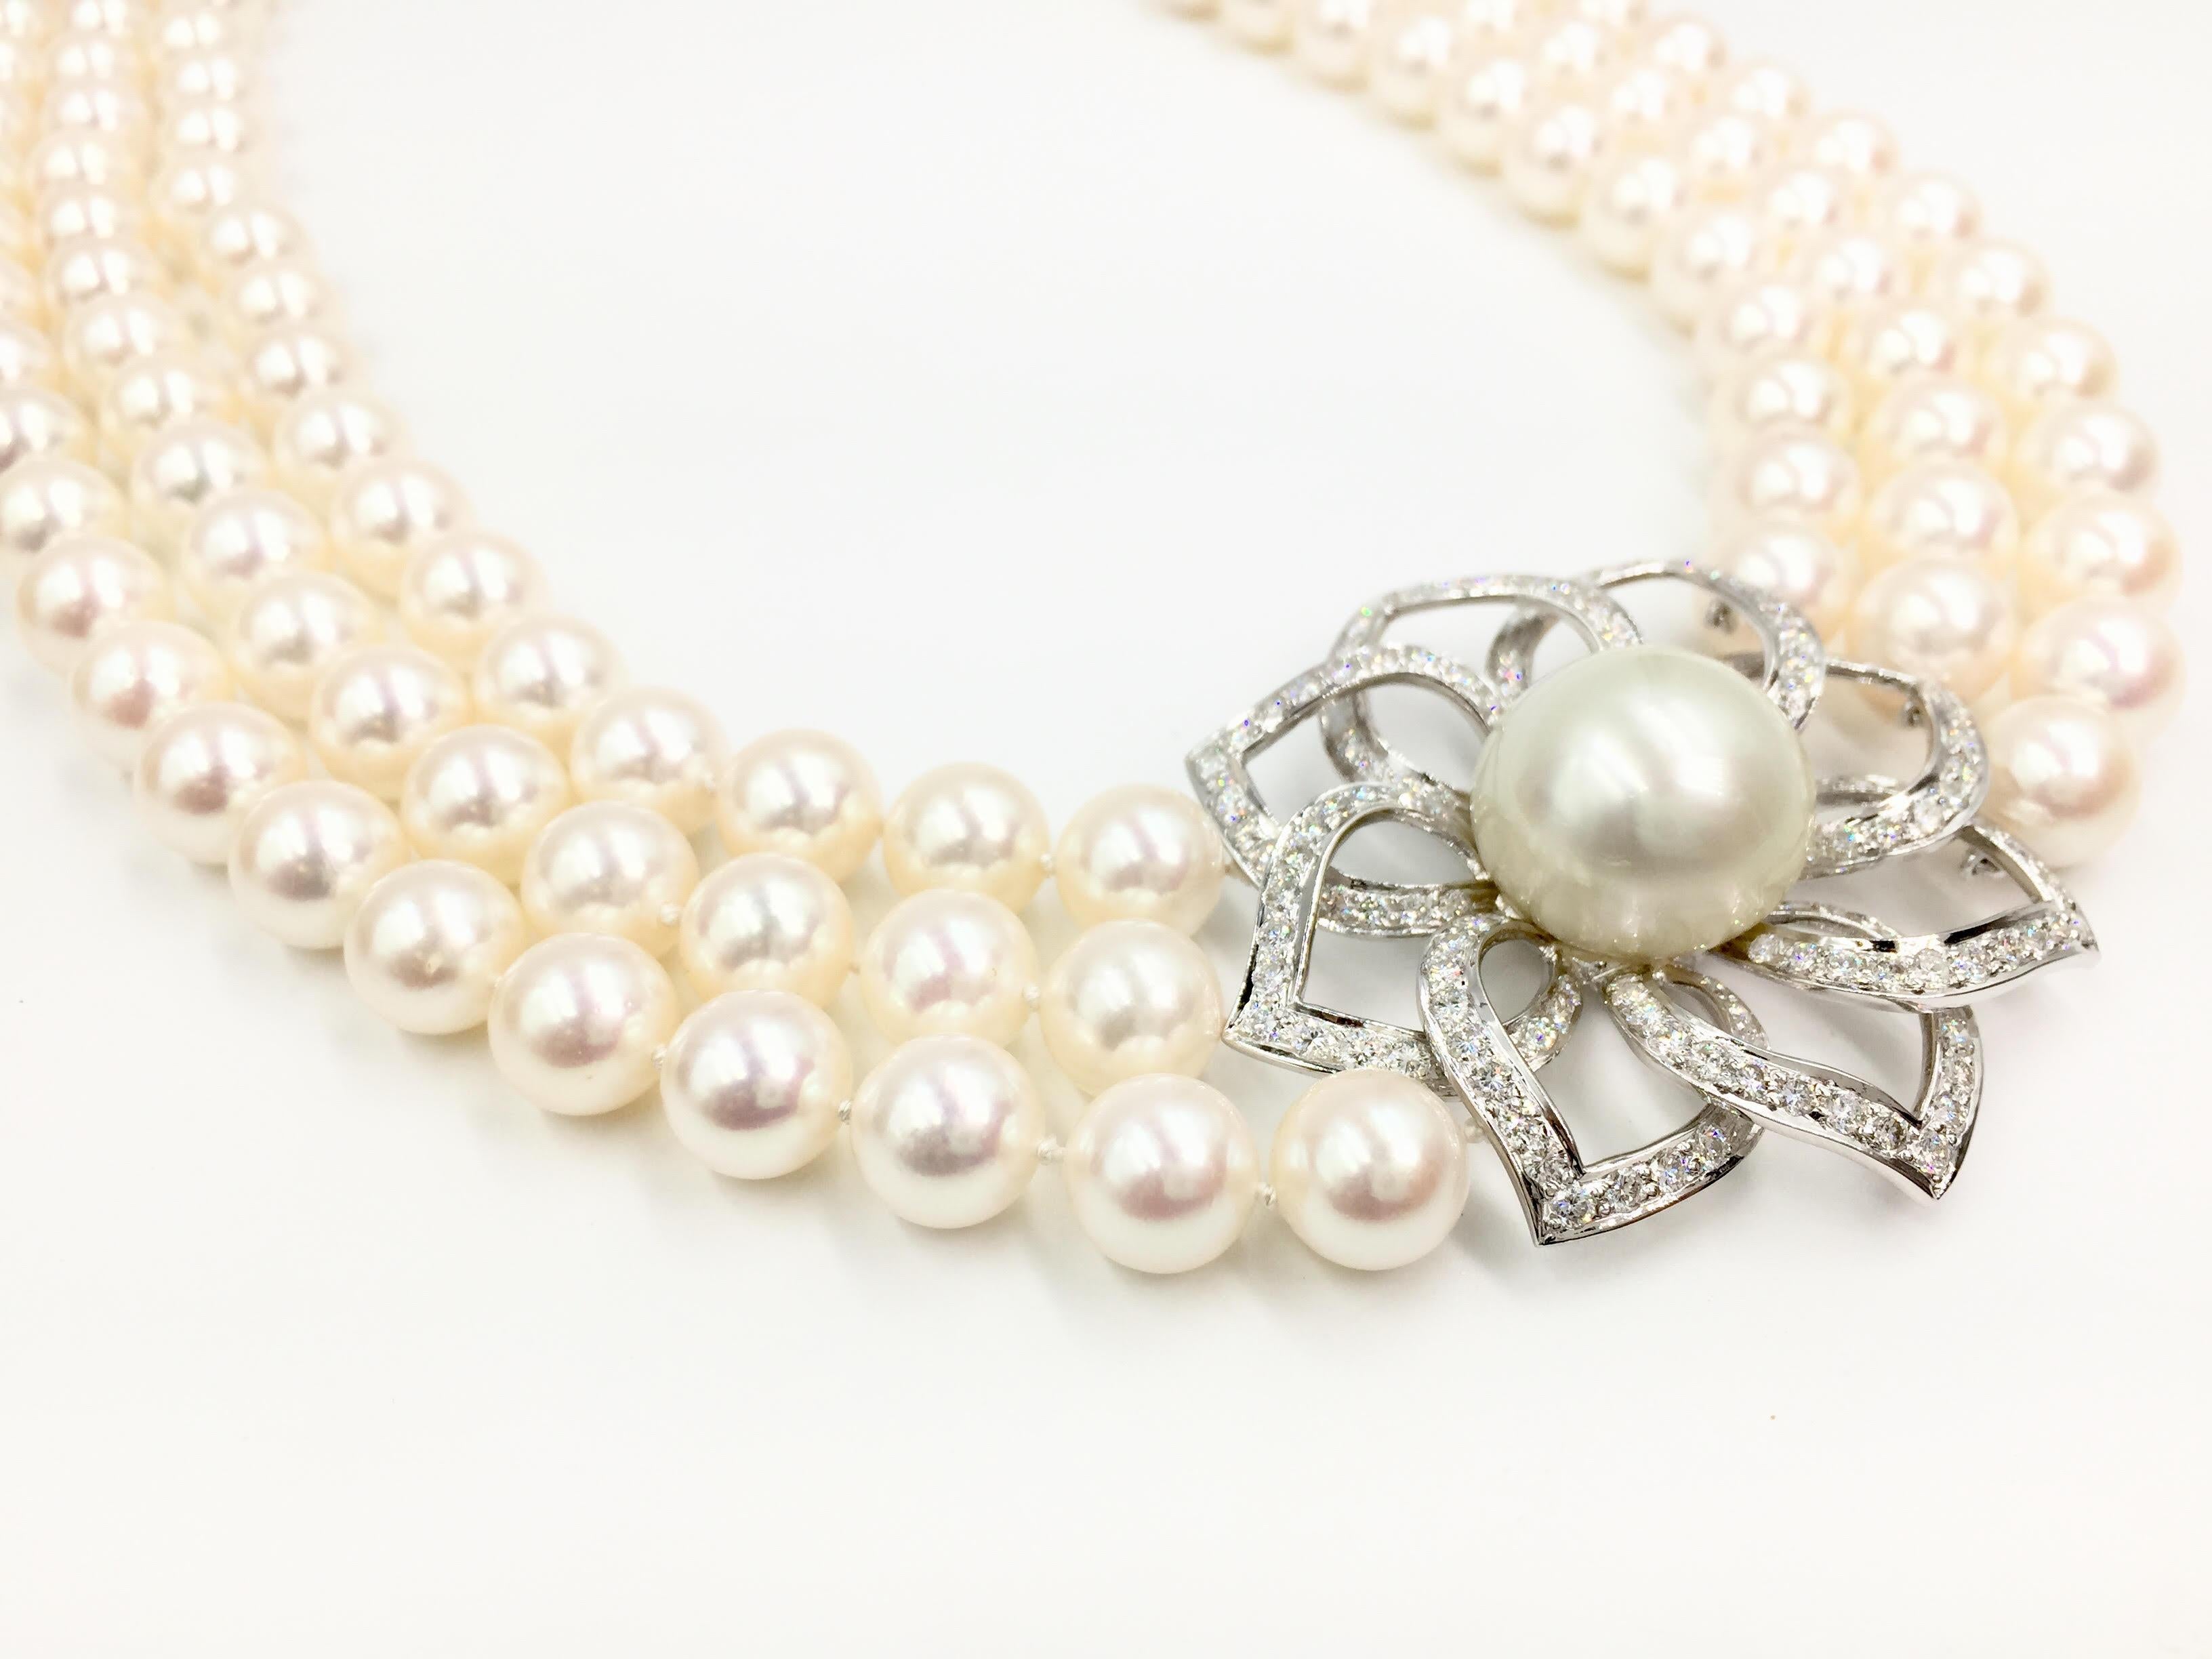 Women's 18 Karat Triple Strand Pearl Necklace with Diamond and South Sea Pearl Pendant